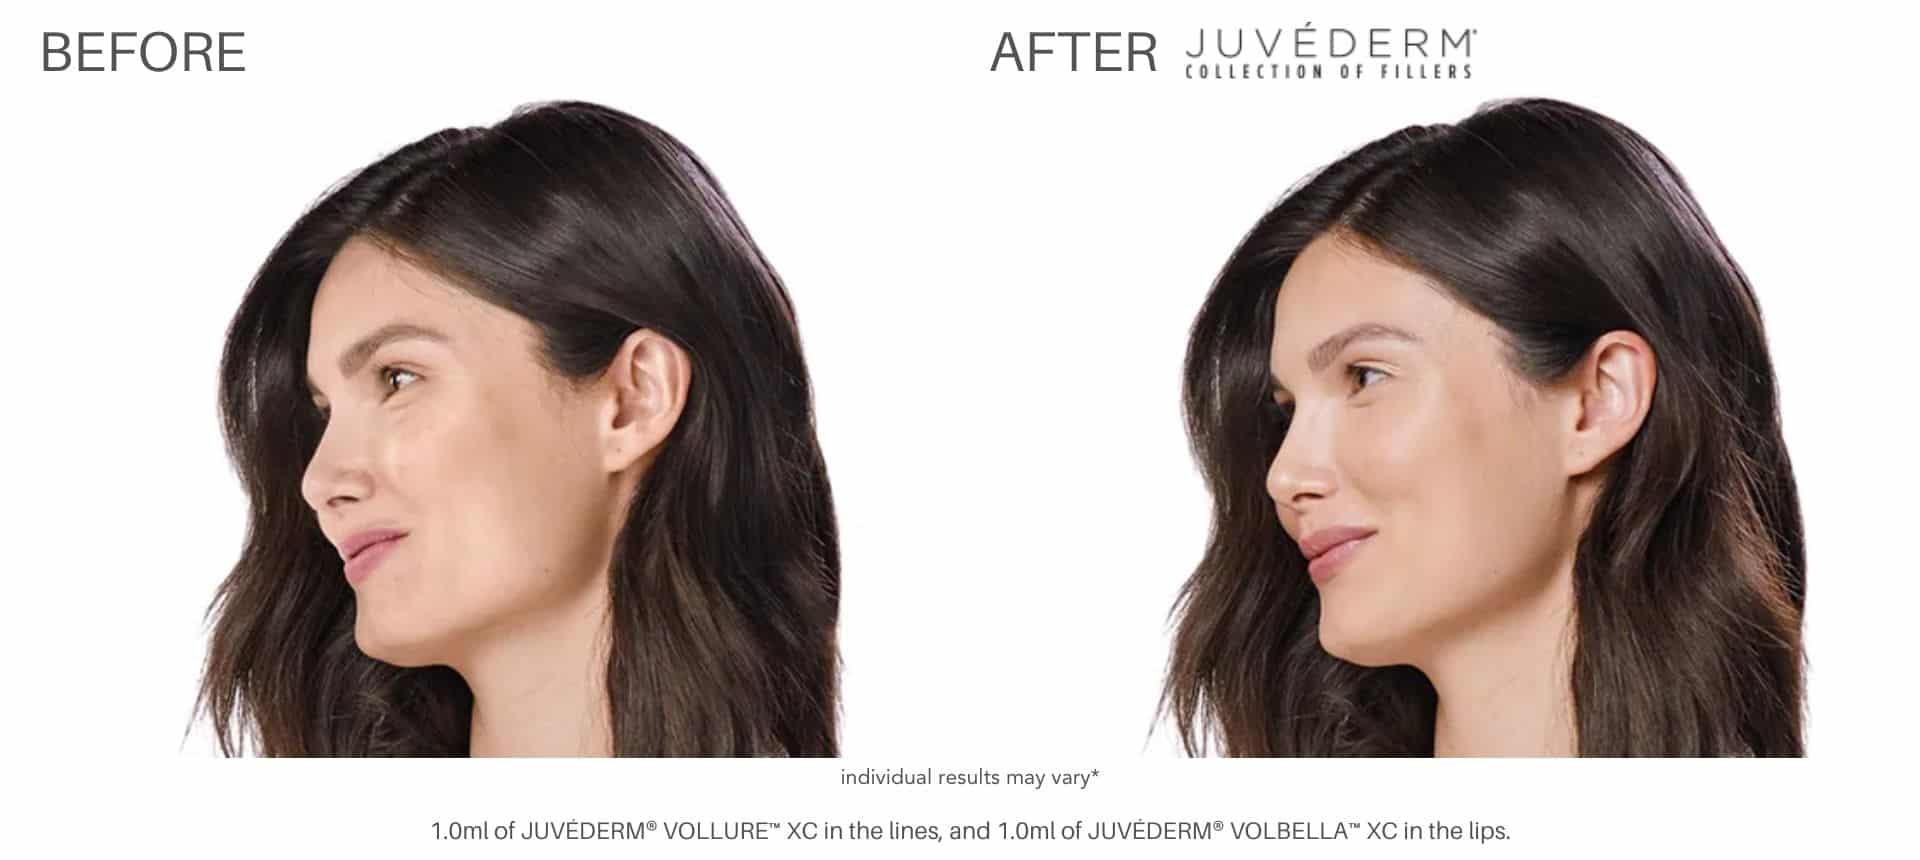 Juvéderm before and after results in Los Angeles, CA at Sculpt DTLA.